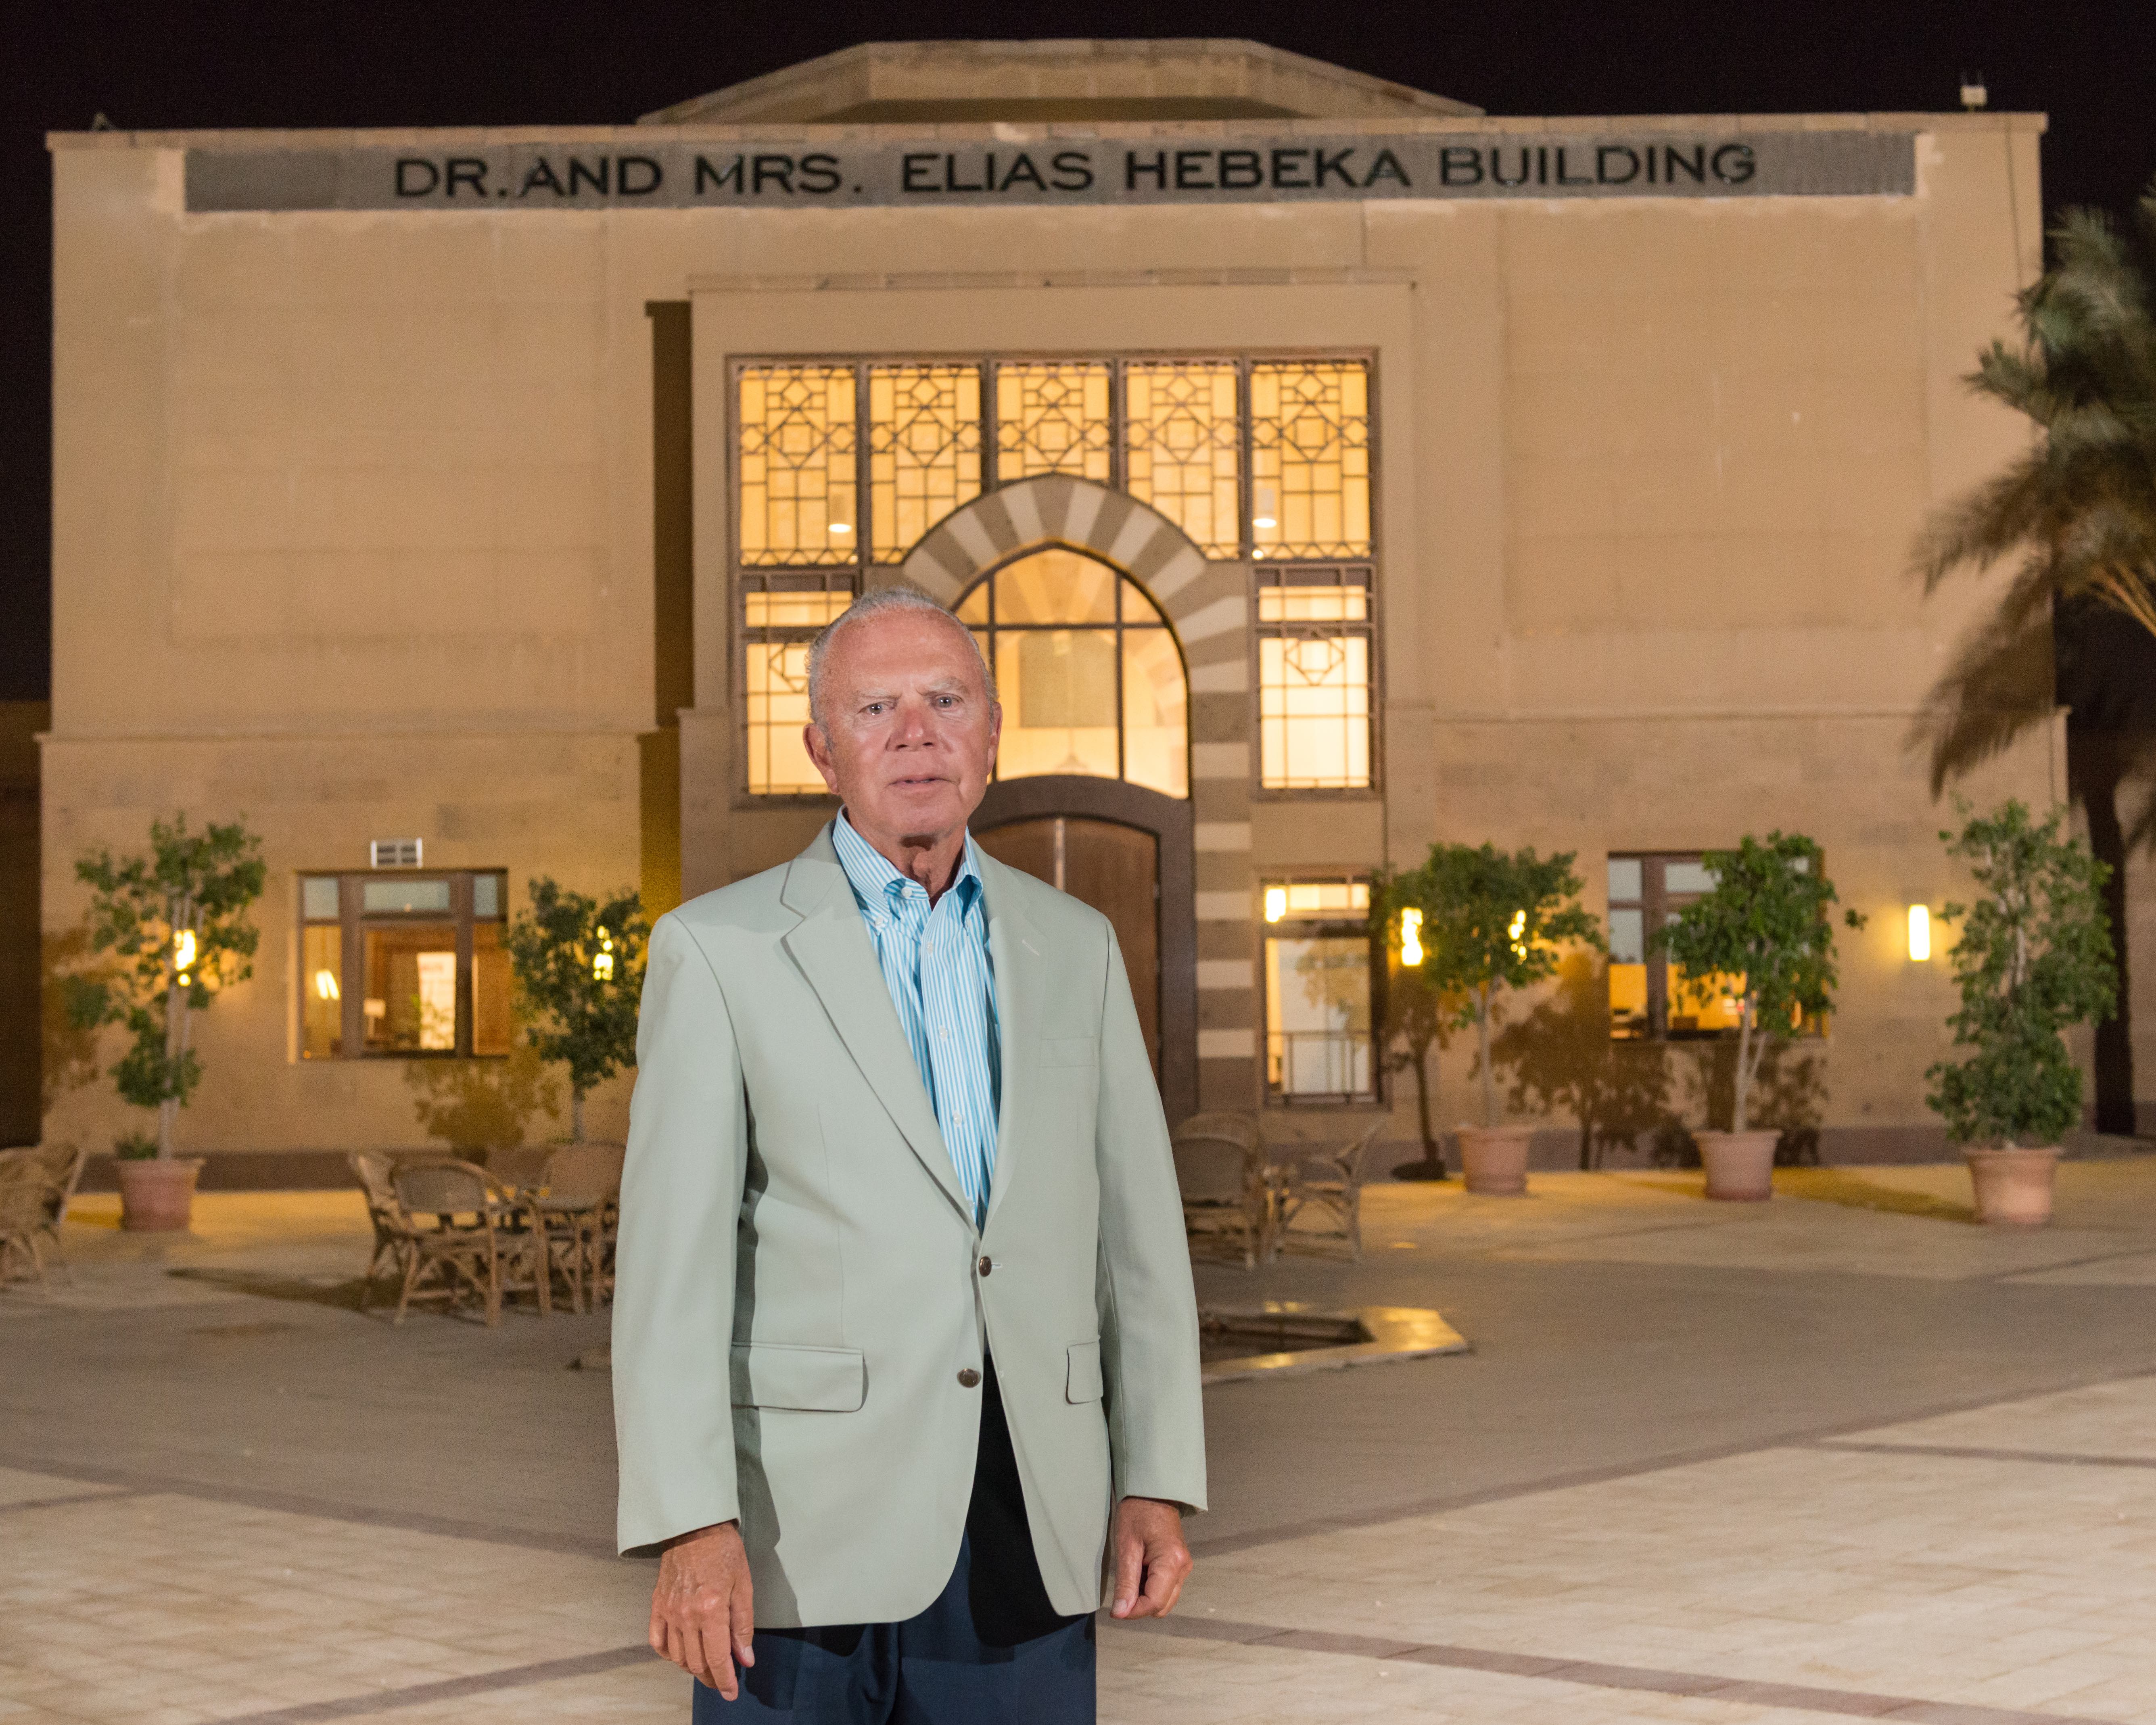 The late Elias Hebeka standing in front of the building in his name on campus 